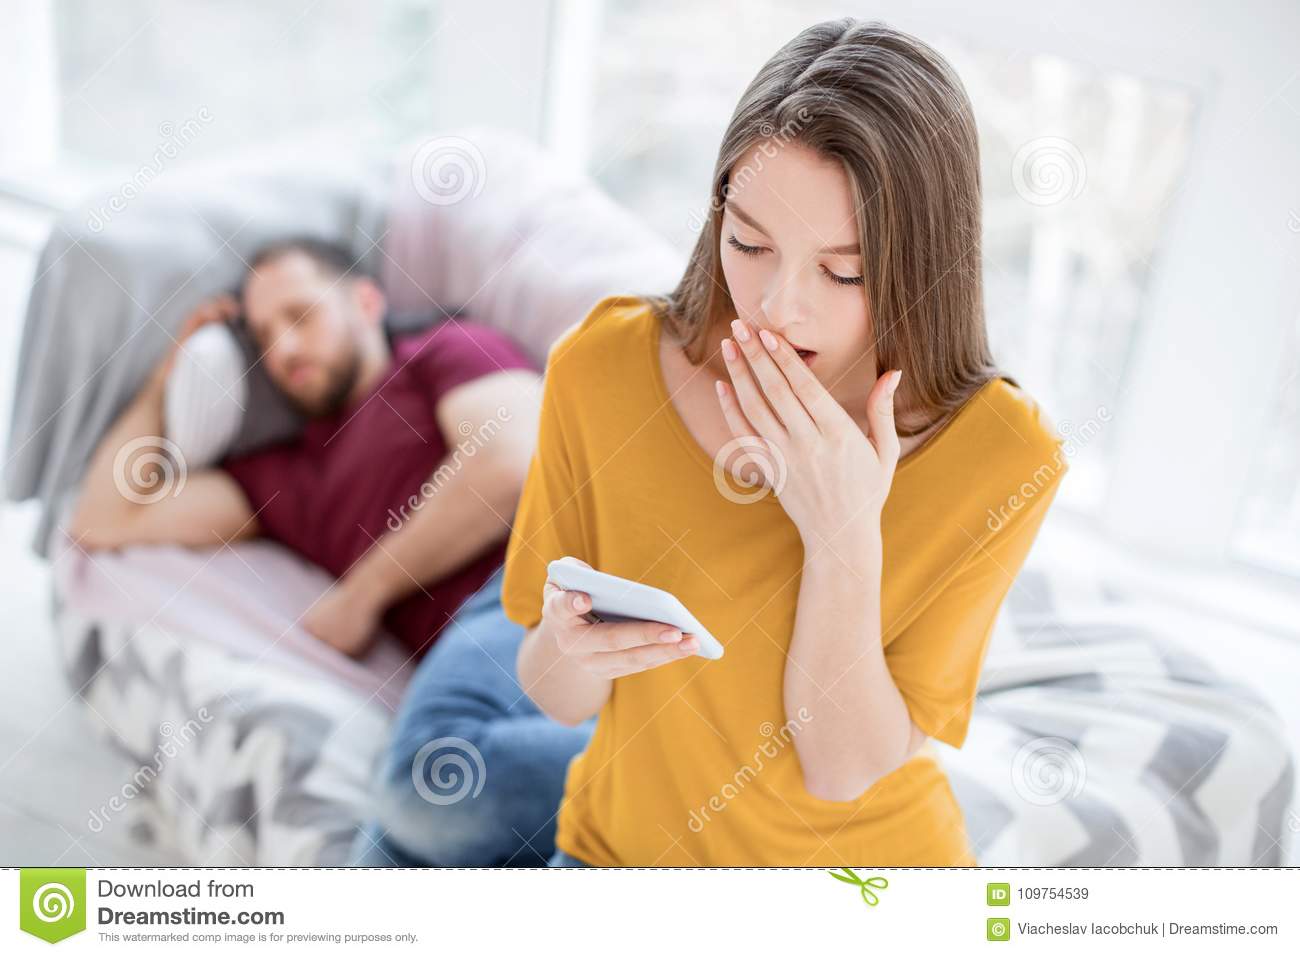 bad-news-good-looking-baffled-long-haired-young-women-feeling-surprised-holding-her-mans-phone...jpg